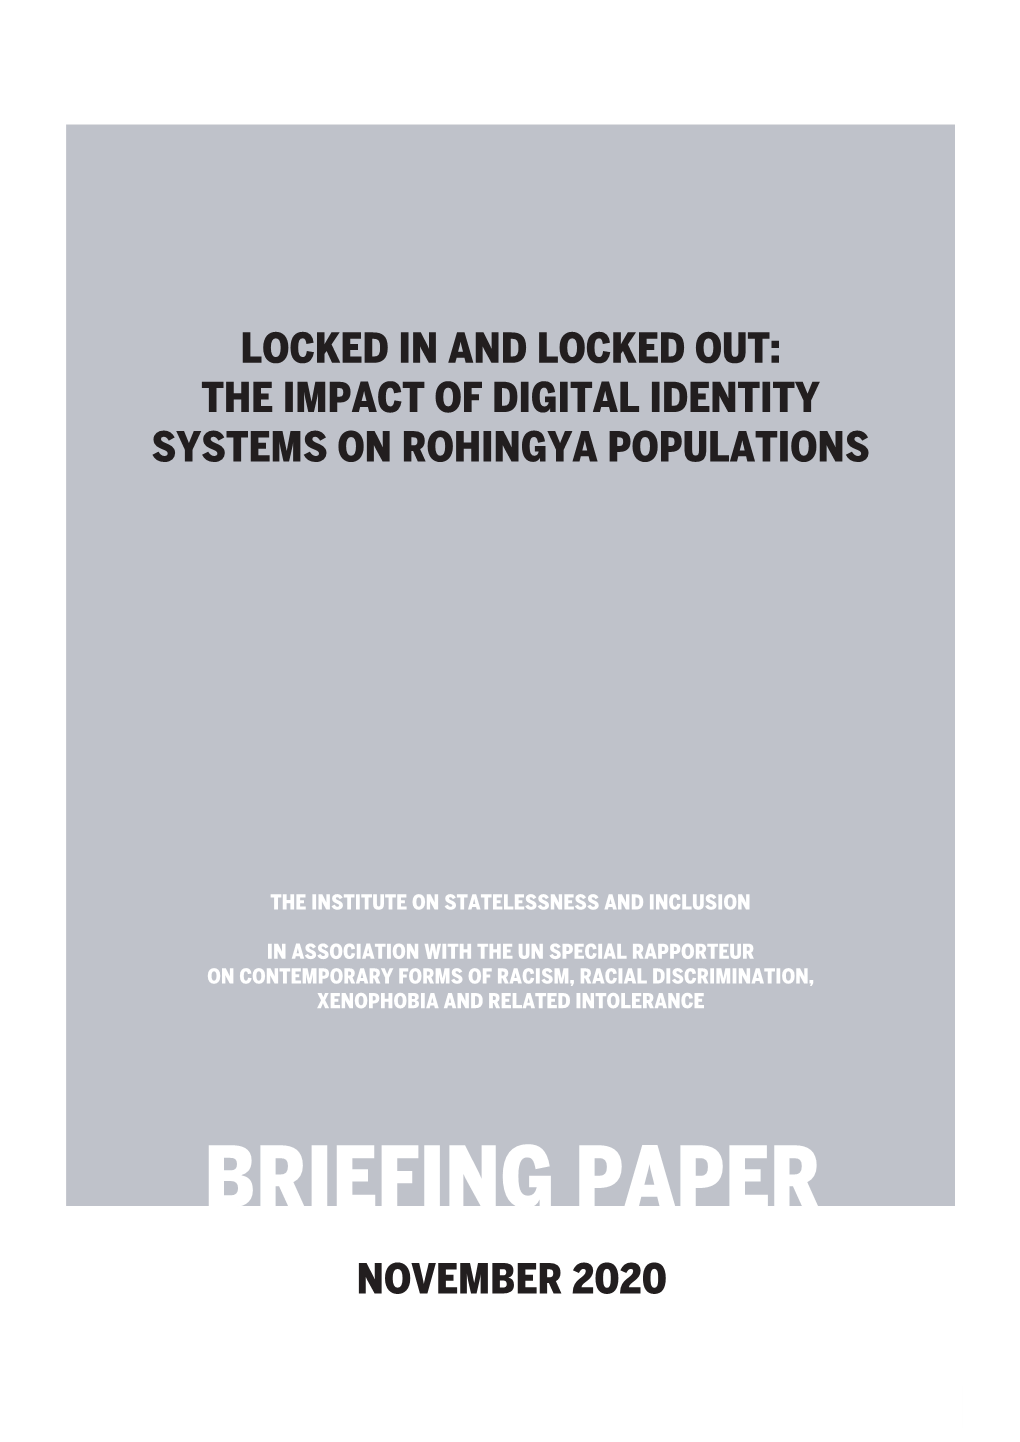 Locked in Locked Out: the Rohingya Briefing Paper